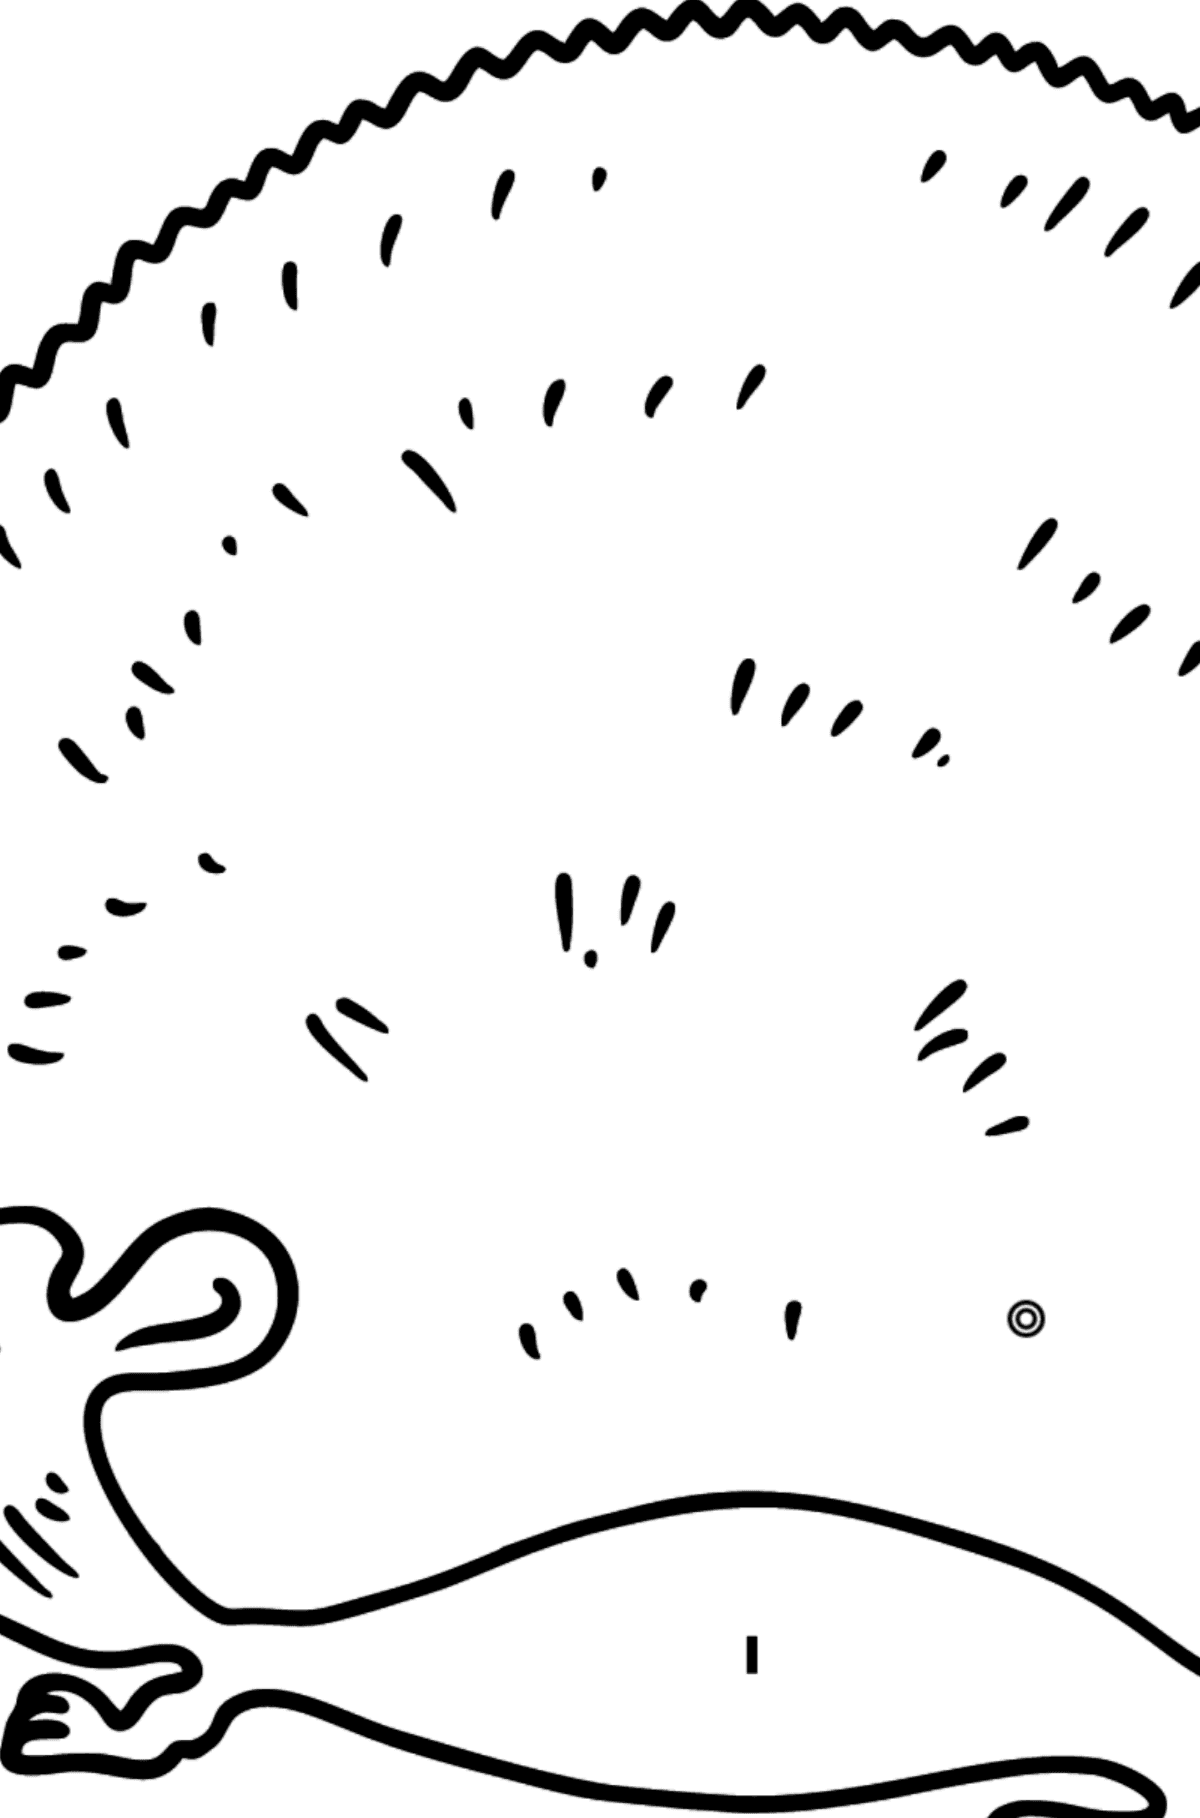 Hedgehog coloring page - Coloring by Symbols and Geometric Shapes for Kids